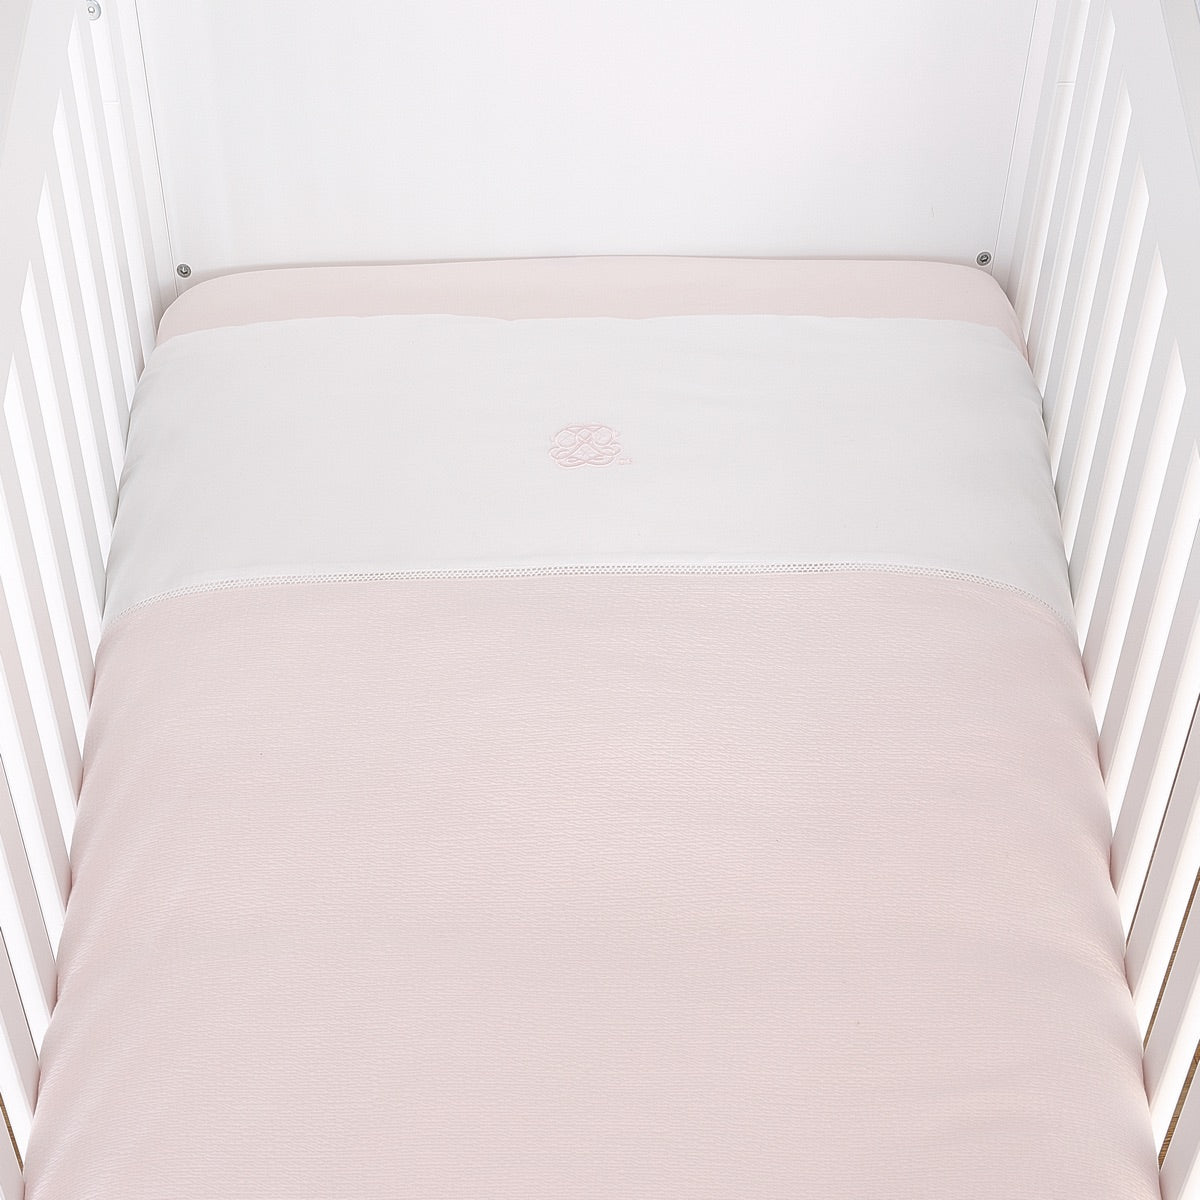 Theophile & Patachou Baby Cot Bed Duvet Cover Padded Effect and Pillowcase - Cotton Pink